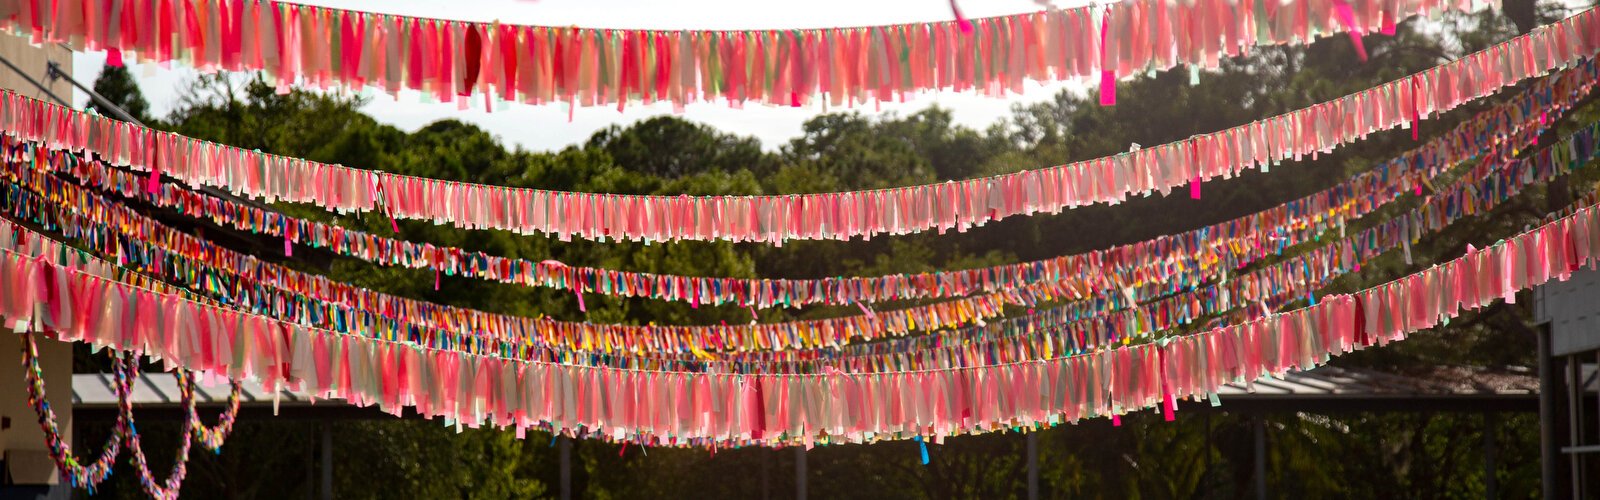 A COVID Ribbon Memorial created by Visual Artist Cathy Tobias hangs in the courtyard of Creative Pinellas in Largo to honor more than 53,000 people who have died from COVID-19 in Florida. Each ribbon represents one death.